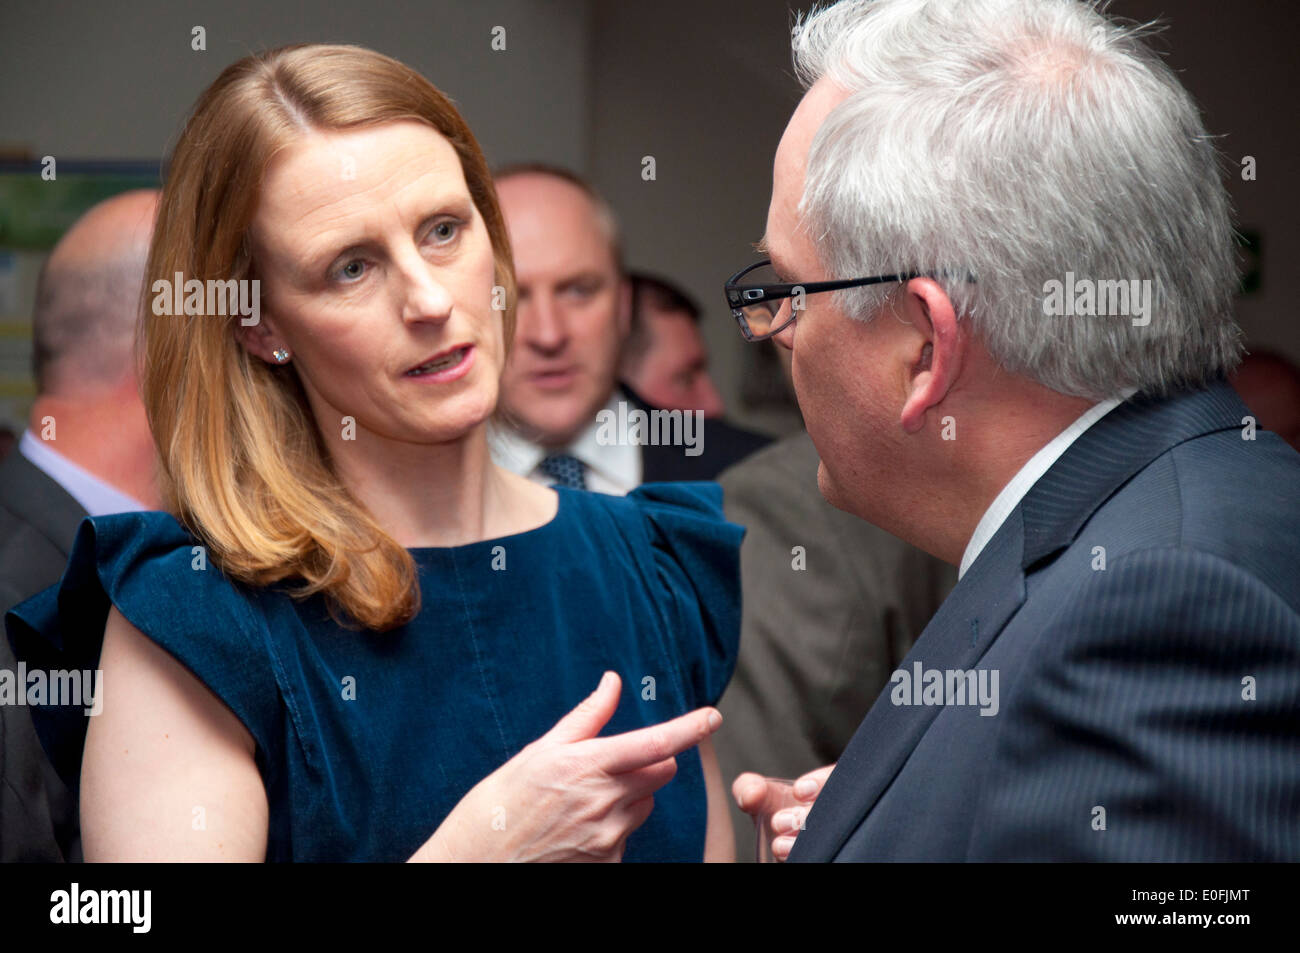 Man and woman talking networking at a business conference social event Stock Photo